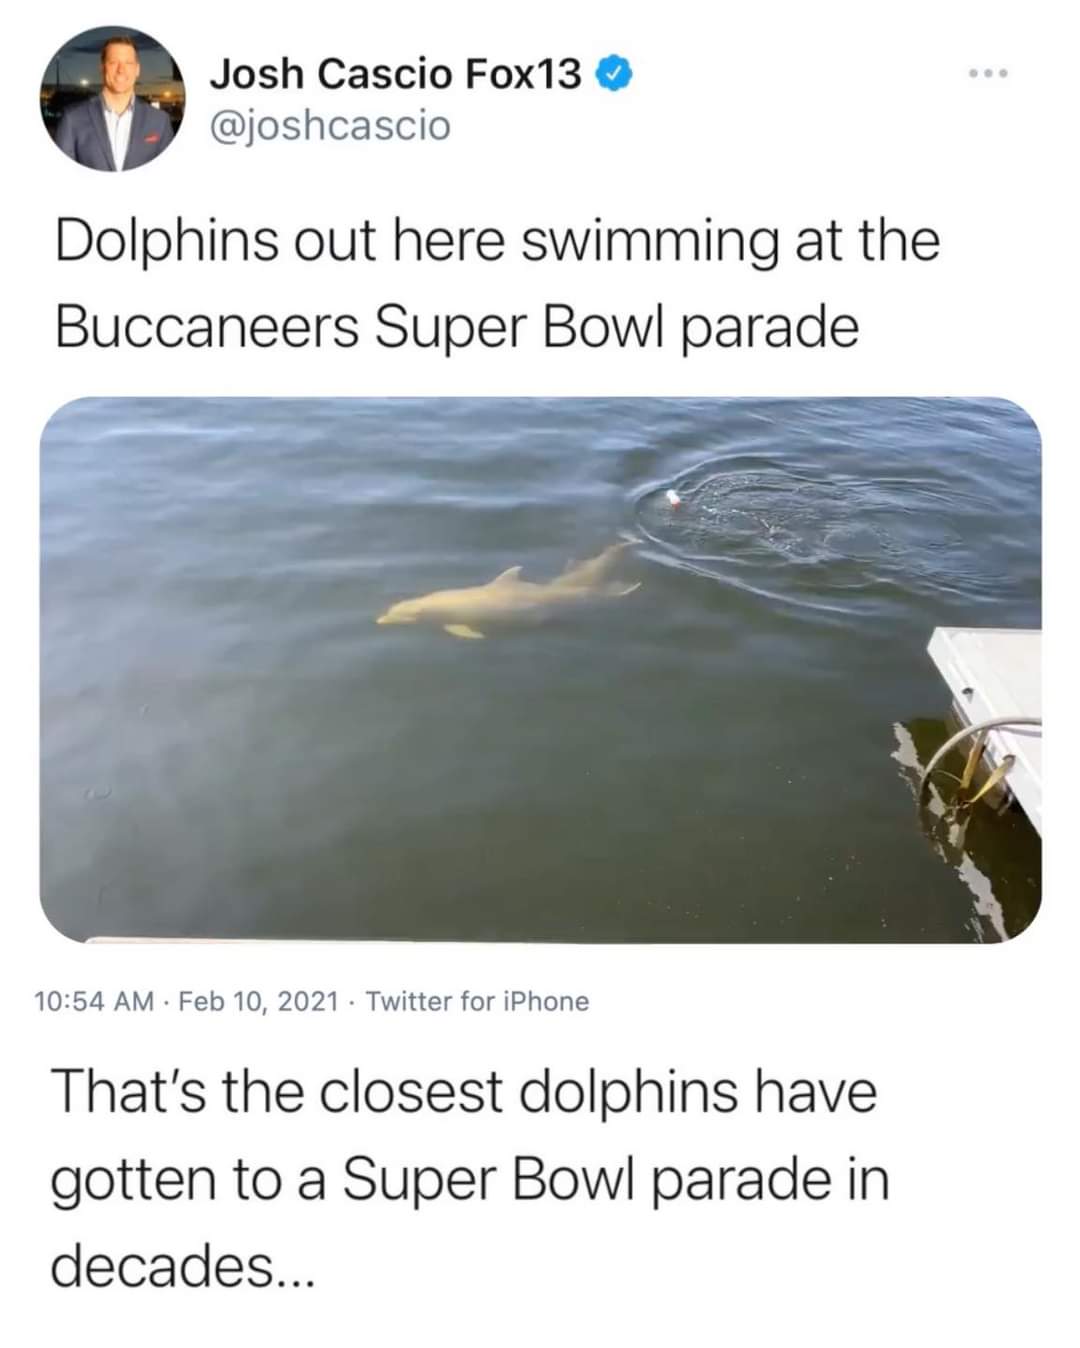 water resources - So Josh Cascio Fox13 Dolphins out here swimming at the Buccaneers Super Bowl parade . Twitter for iPhone That's the closest dolphins have gotten to a Super Bowl parade in decades...